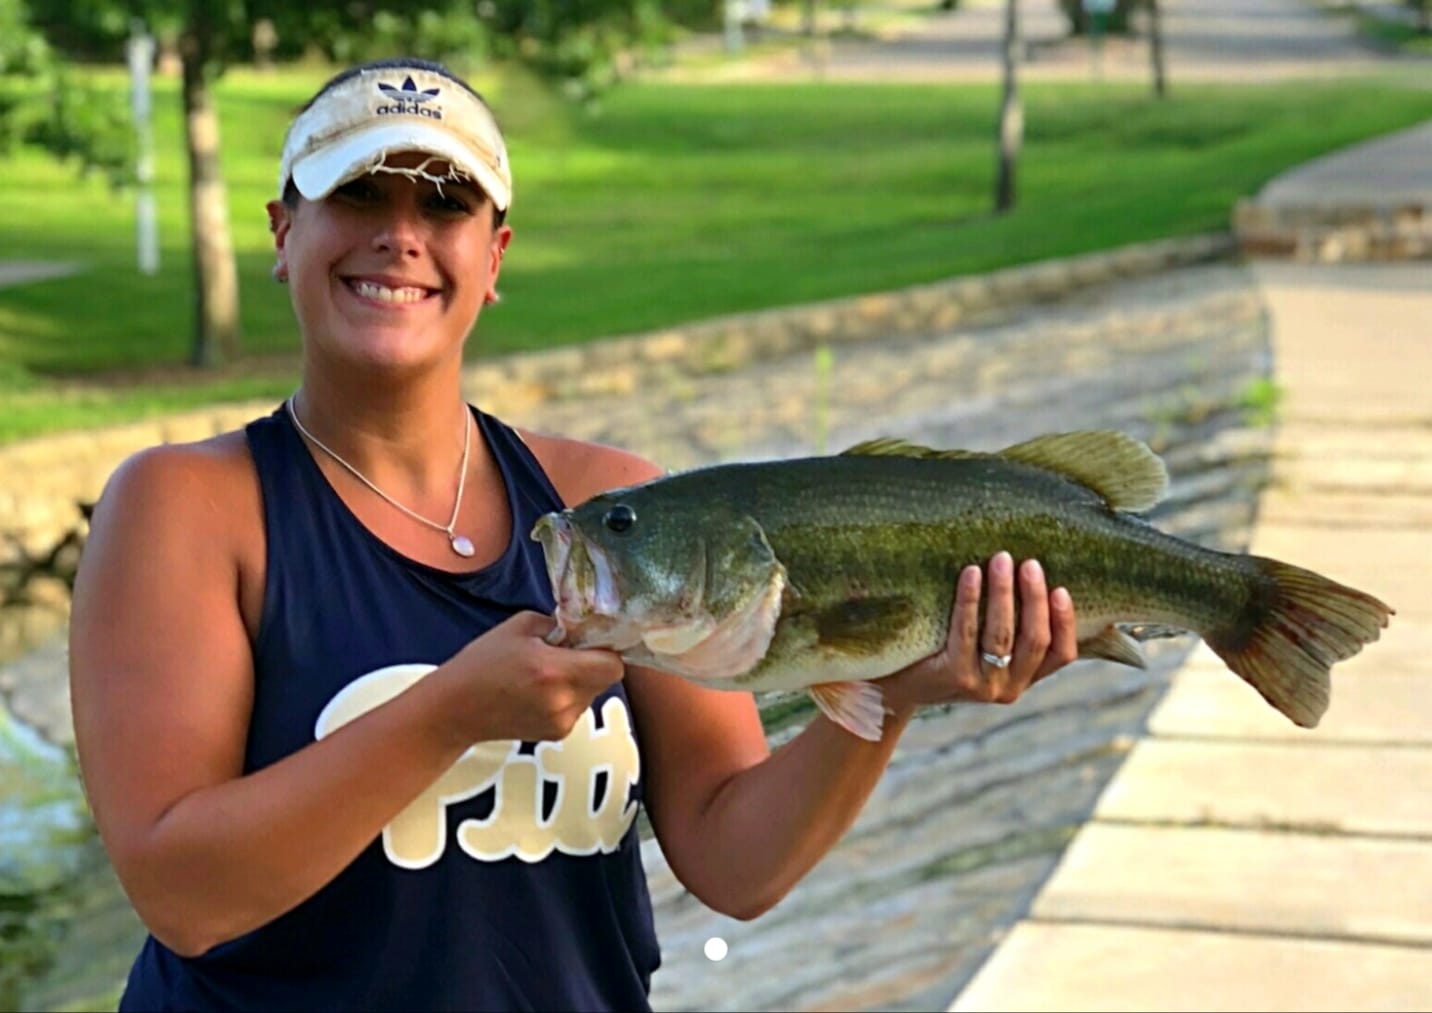 Katie with a 5.4 pound bass